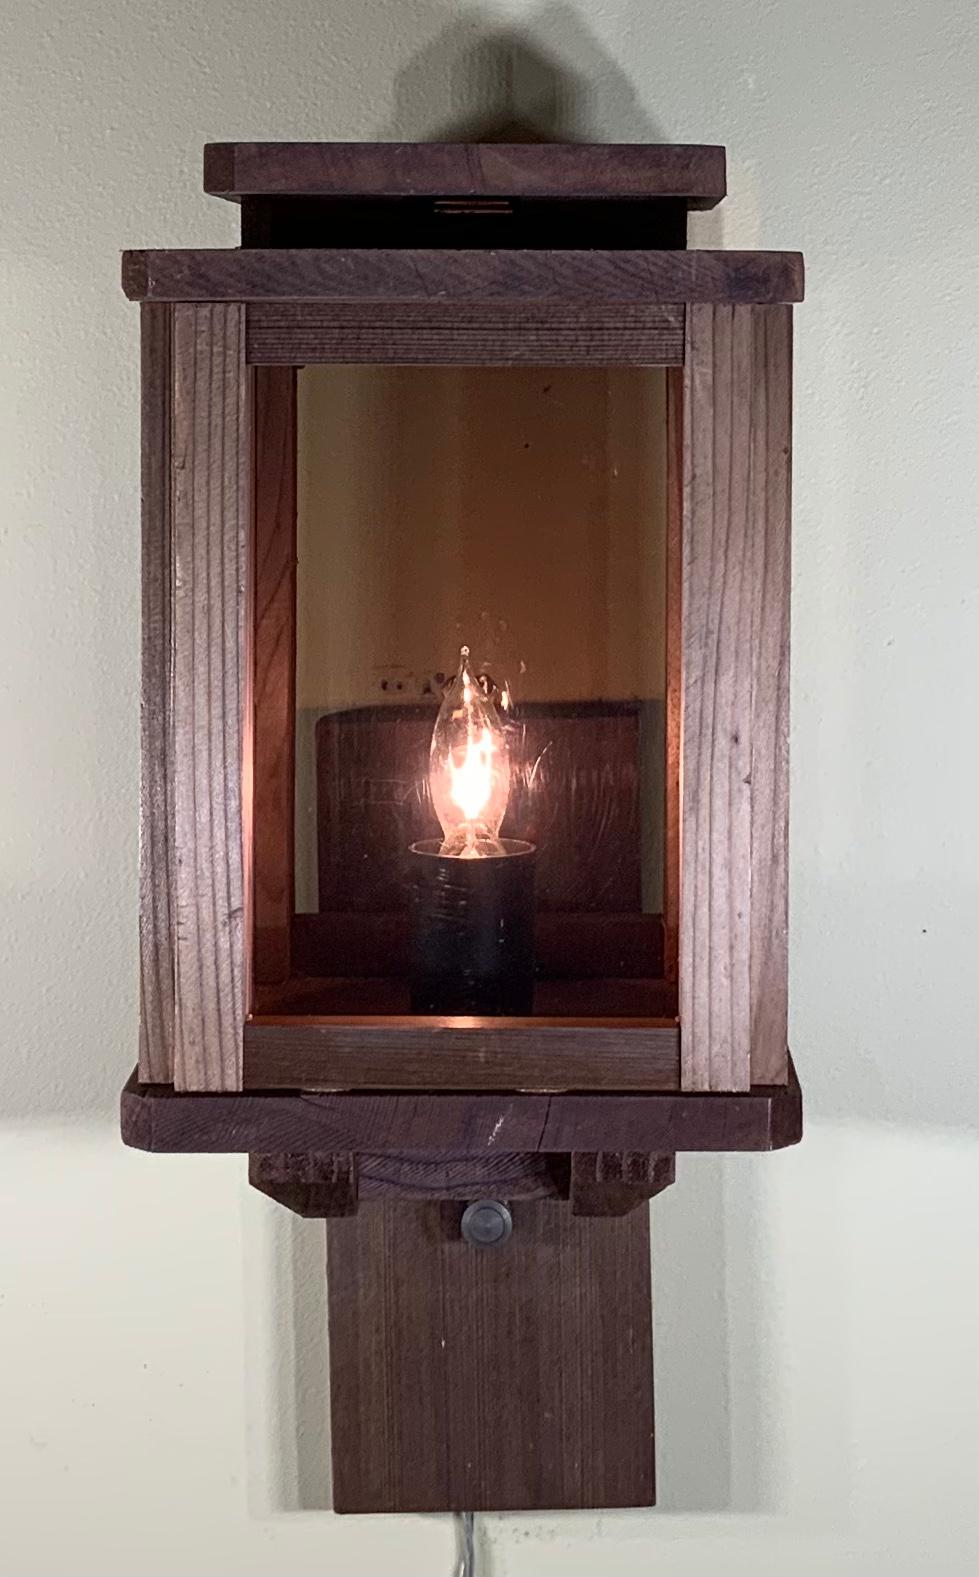 Custom made lantern made of Cyprus wood, four greyish acrylic sides, with one 75/watt light
Electrified and ready to use. Will look great on front cabin or side garage.
Easy lightbulbs change with twin screws from the top.
Backplate size: 5”.5